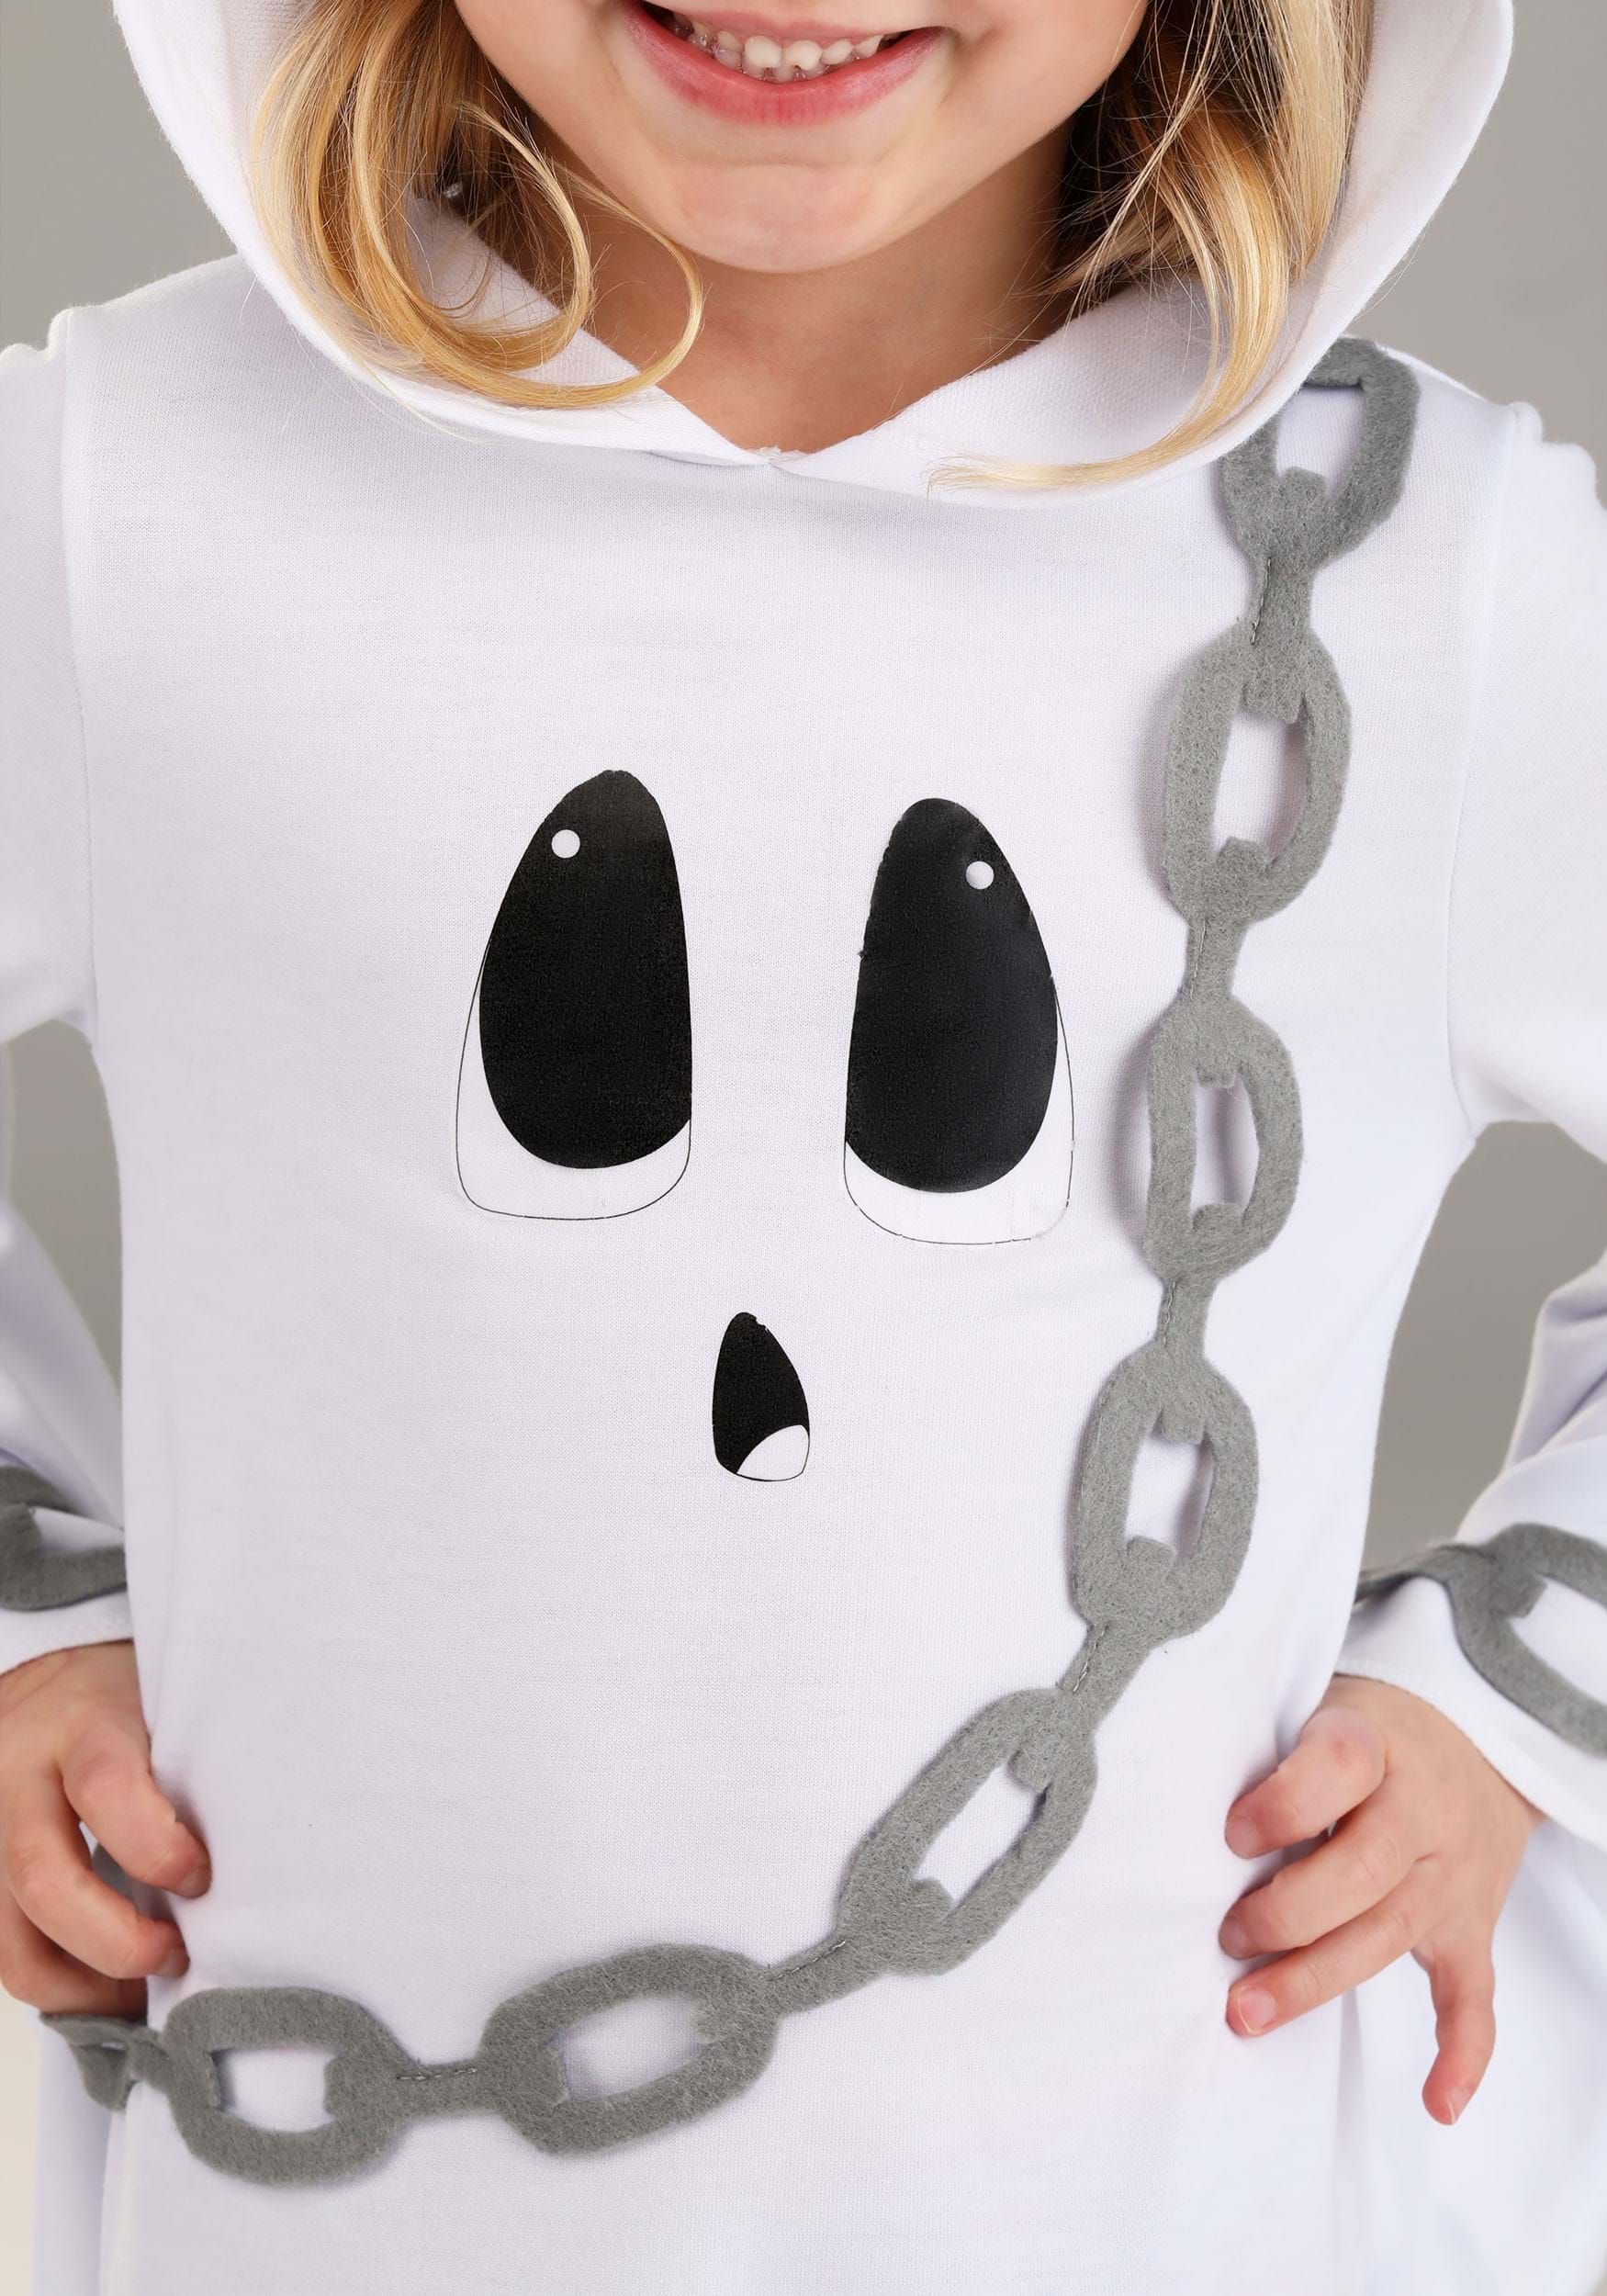 Chained Ghost Toddler Costume